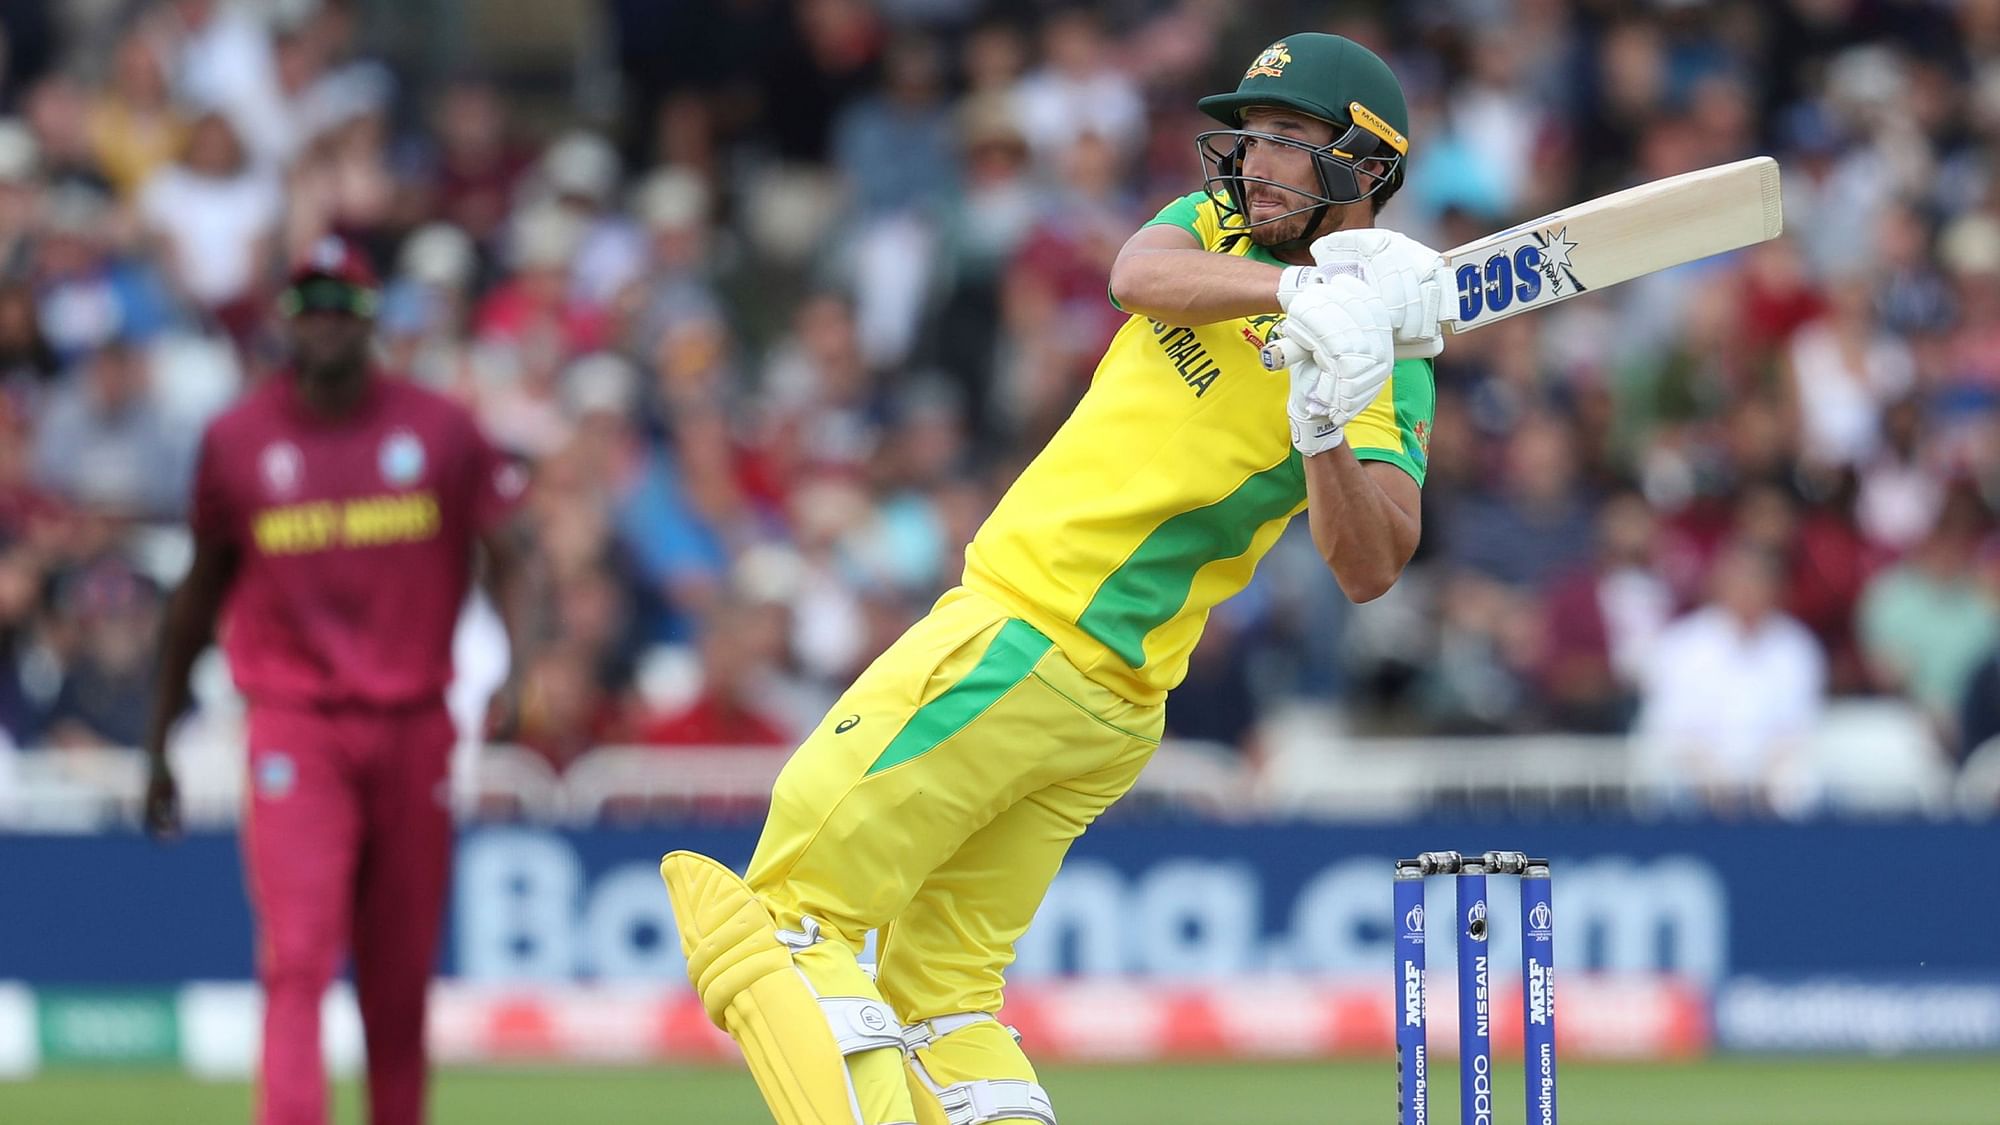 Nathan Coulter-Nile scored a 60-ball 92 against West Indies on Thursday.